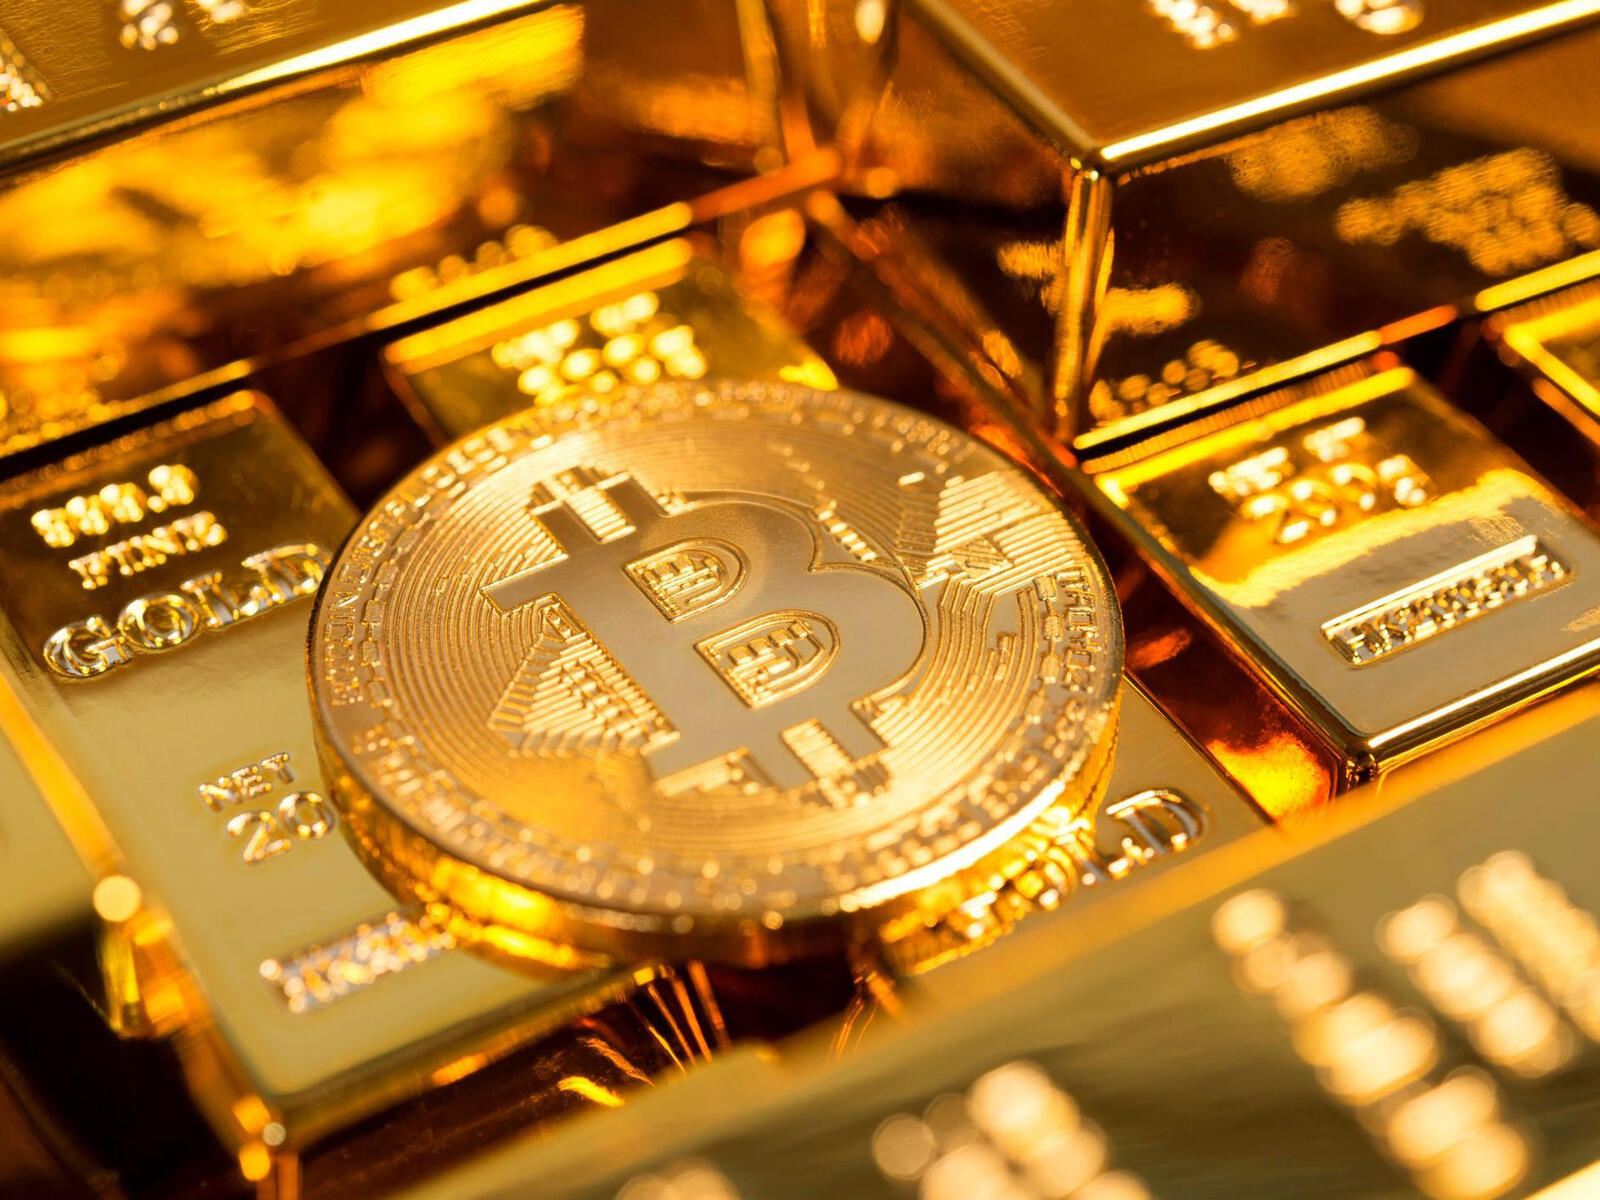 Free photo Gold bars with bitcoin coins